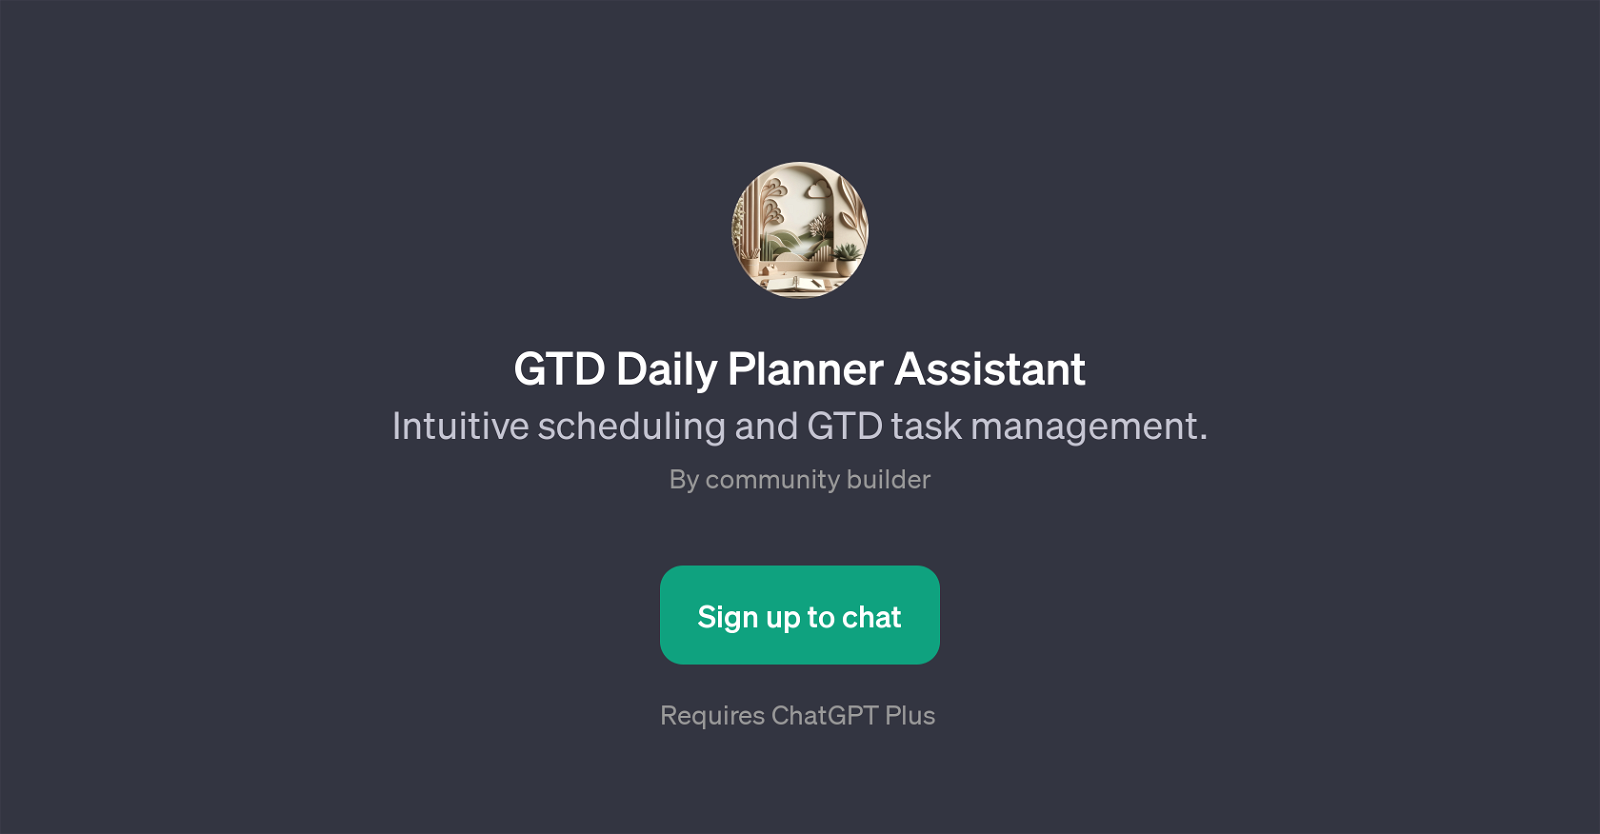 GTD Daily Planner Assistant website